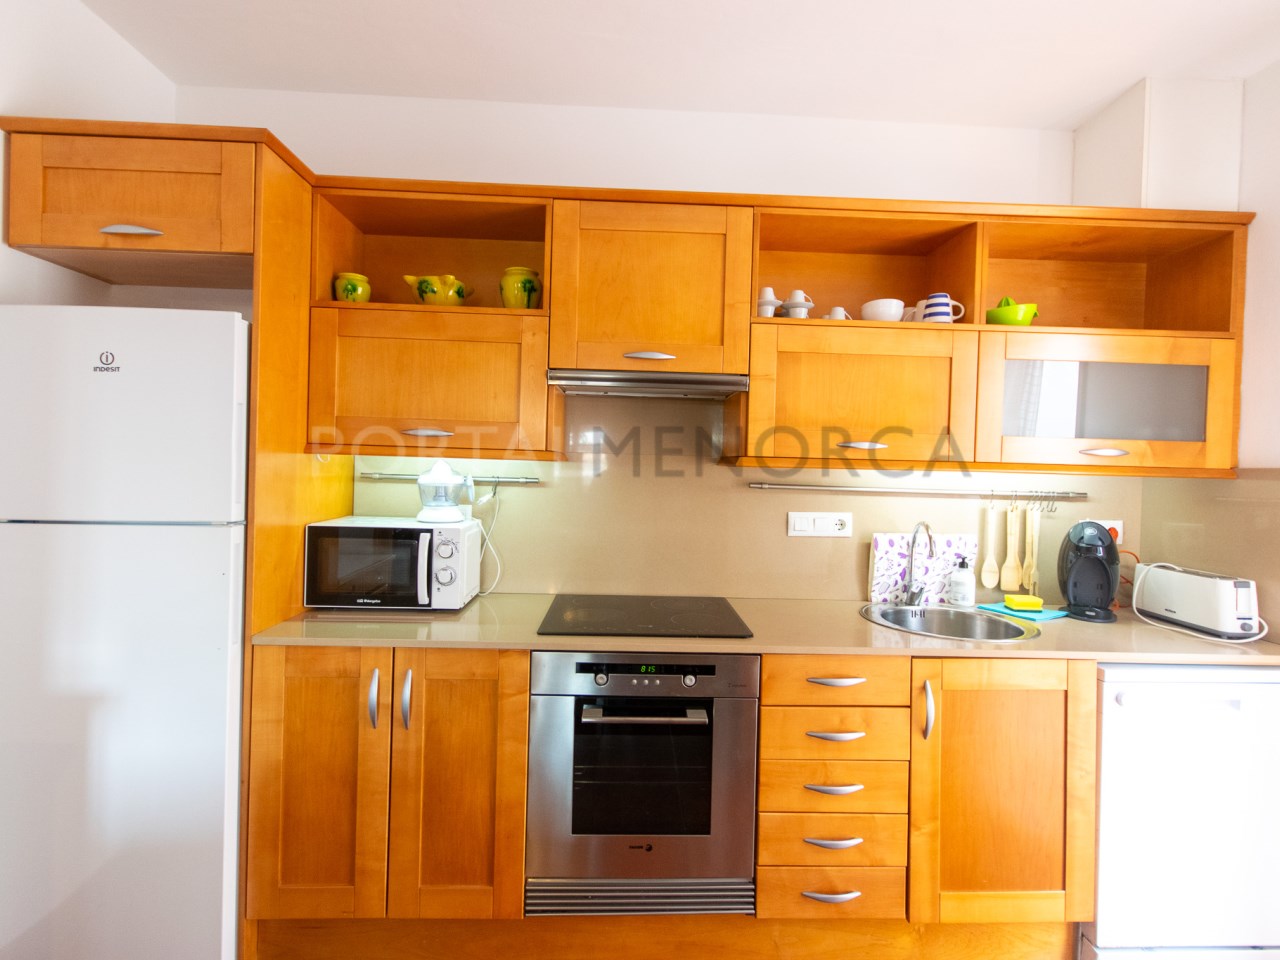 Kitchen of a villa with tourist license for sale in Cala n Bosch